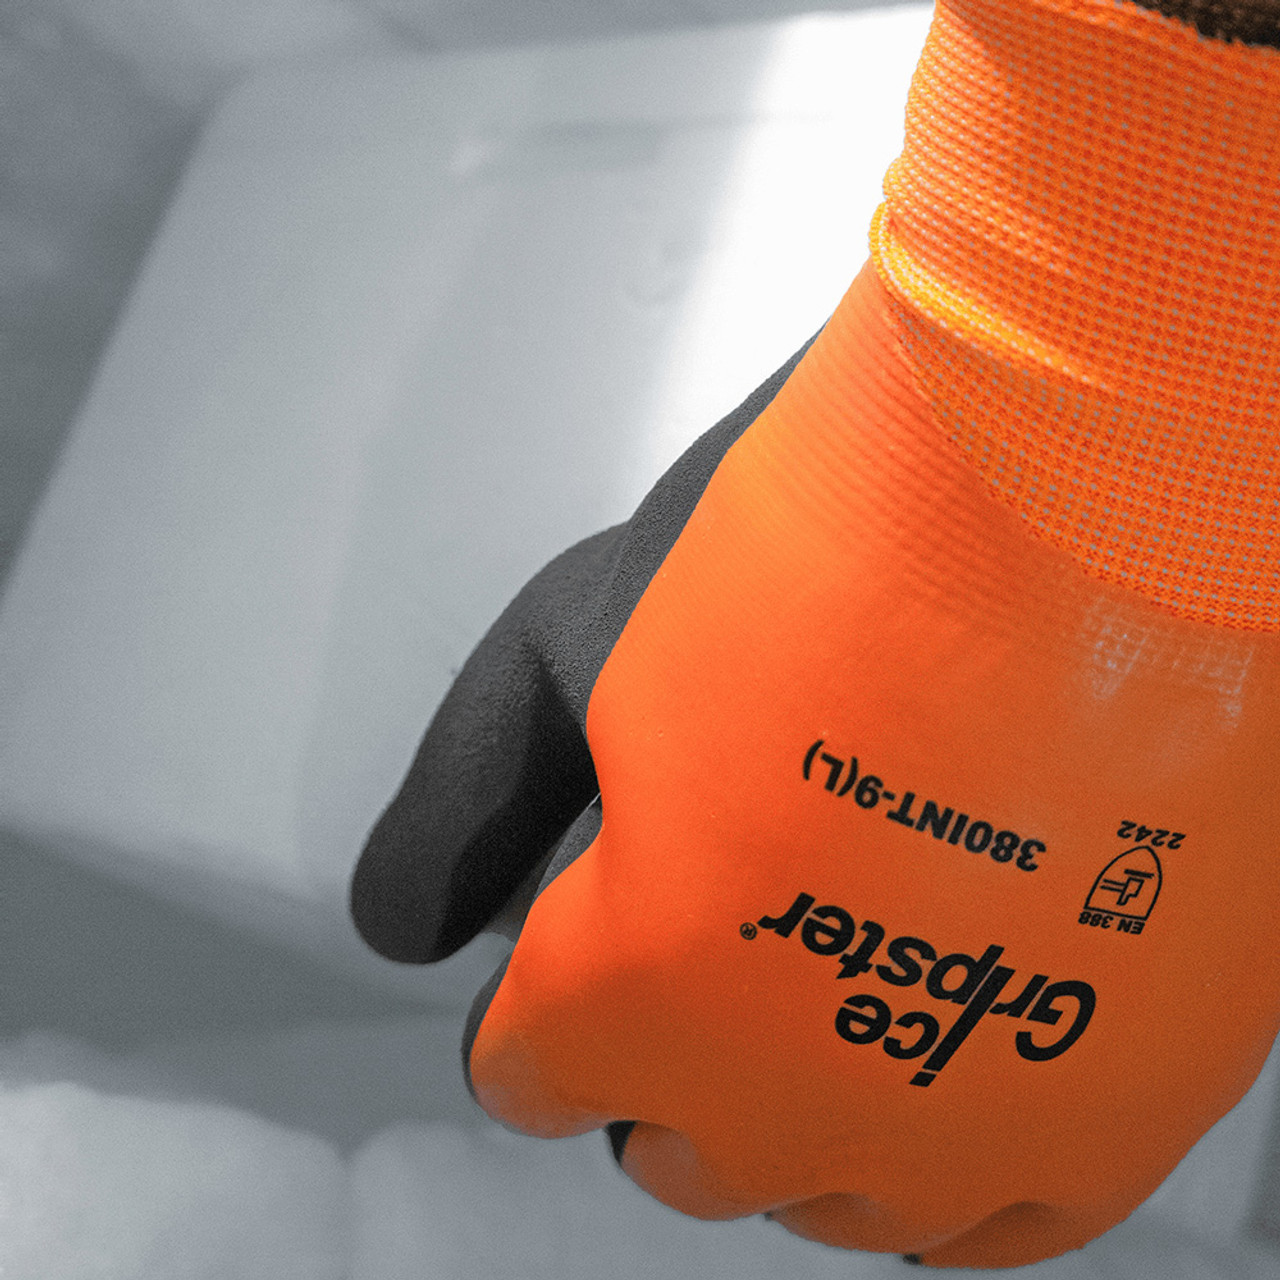 Ice Gripster® Cut Abrasion Puncture Hi Vis Double-Coated Low Temp Gloves -  Dozen 380INT